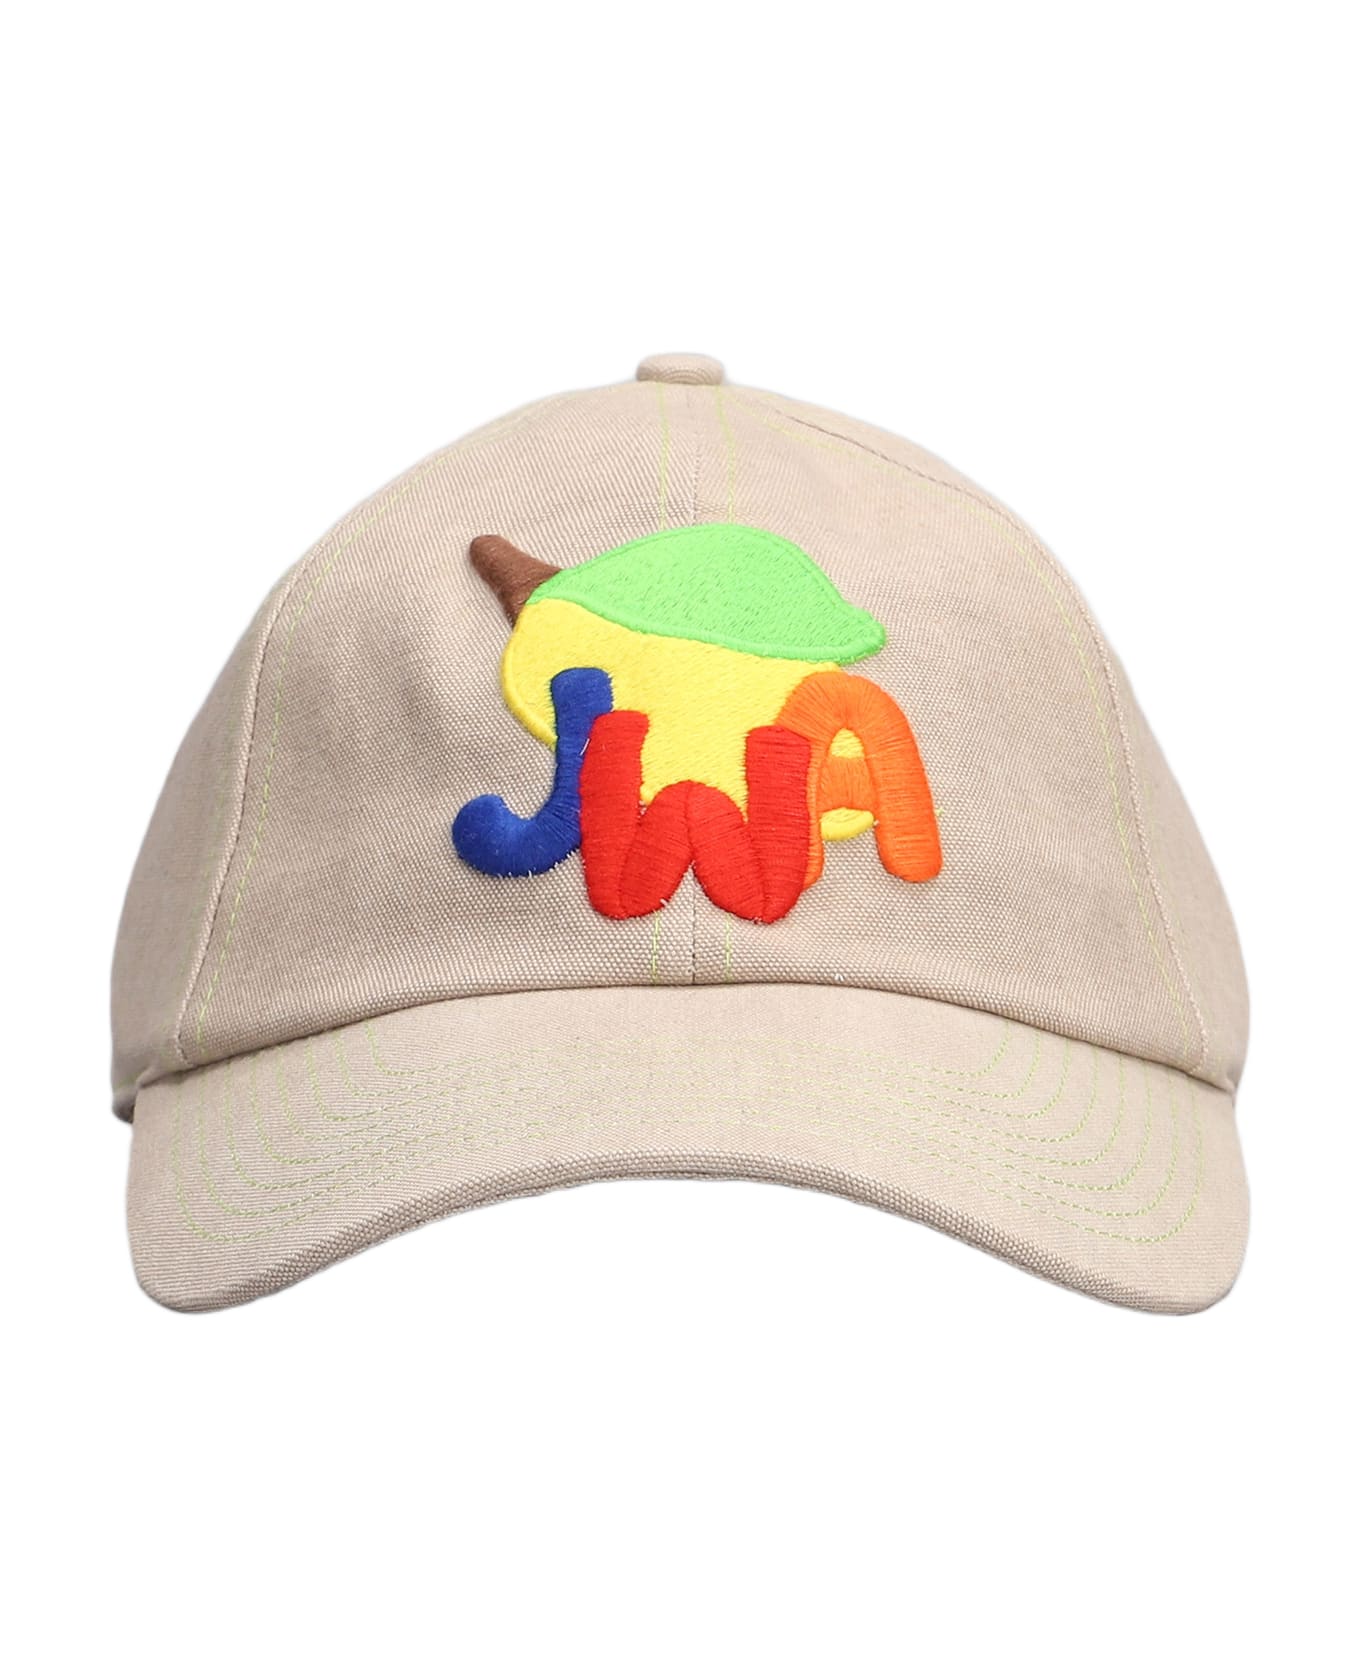 J.W. Anderson Jw Anderson Patched Baseball Cap - PUTTY